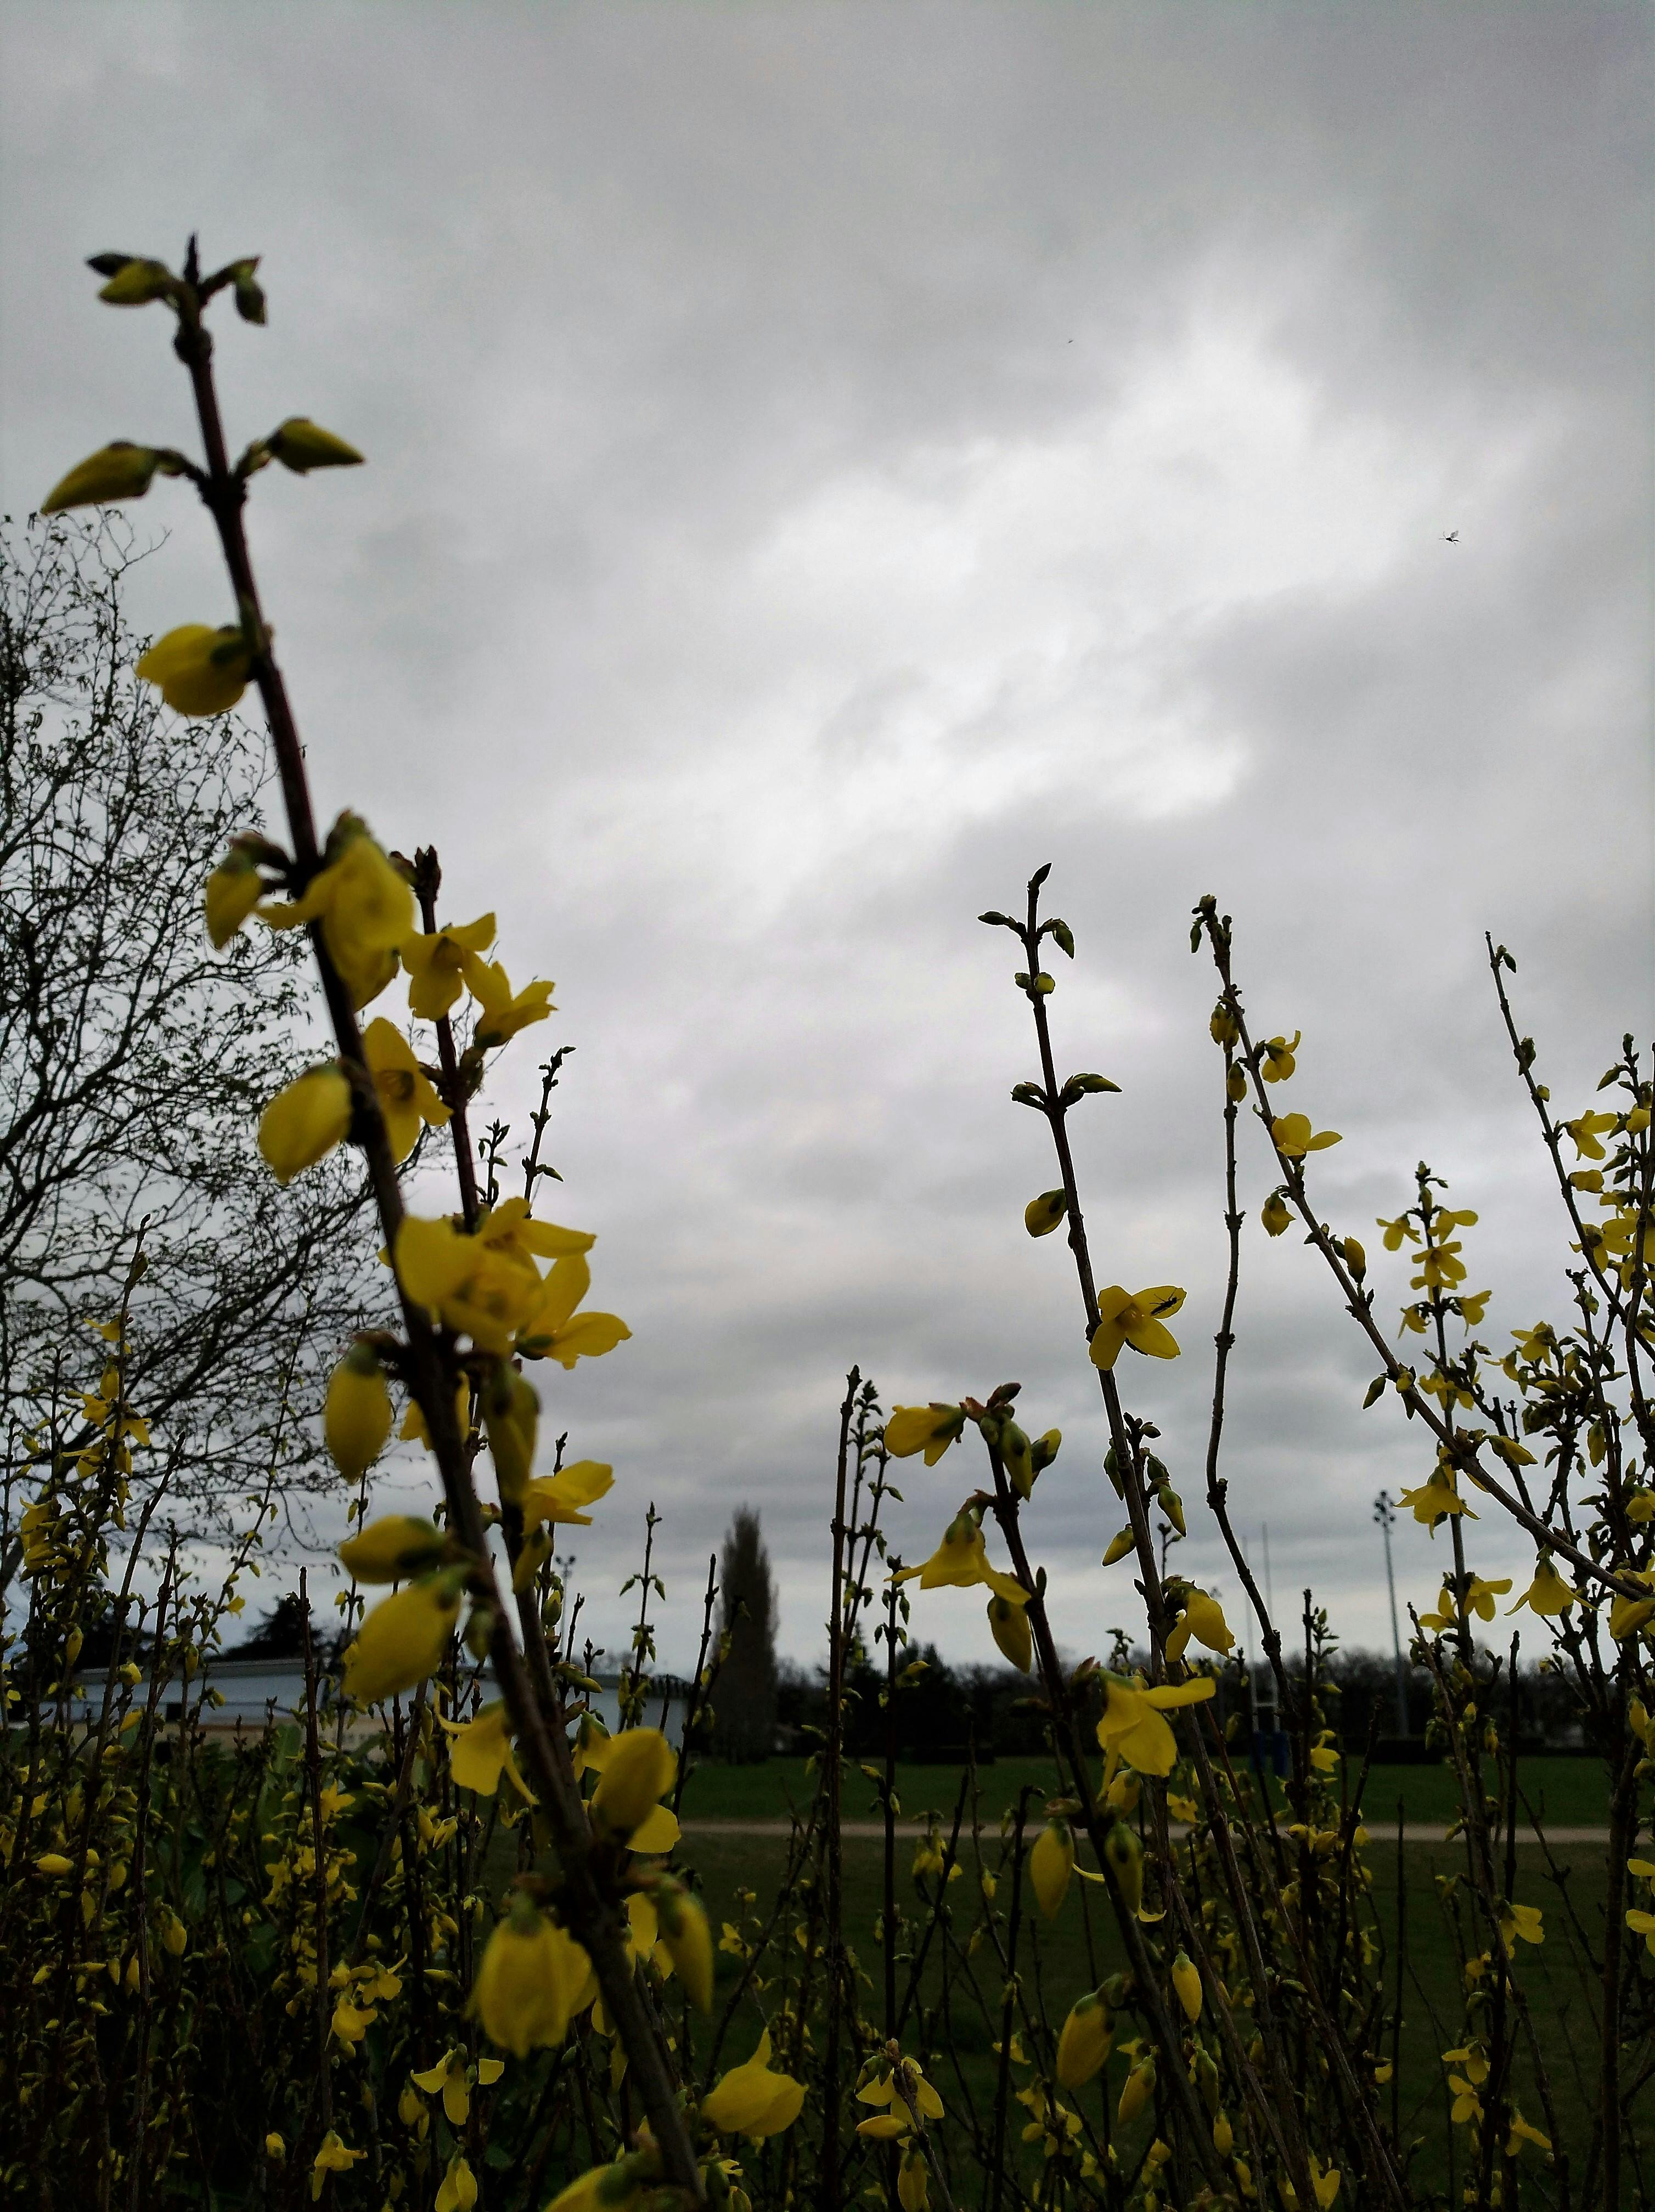 Free stock photo of Forsythia sunny flowers in a cloudy sky, nature